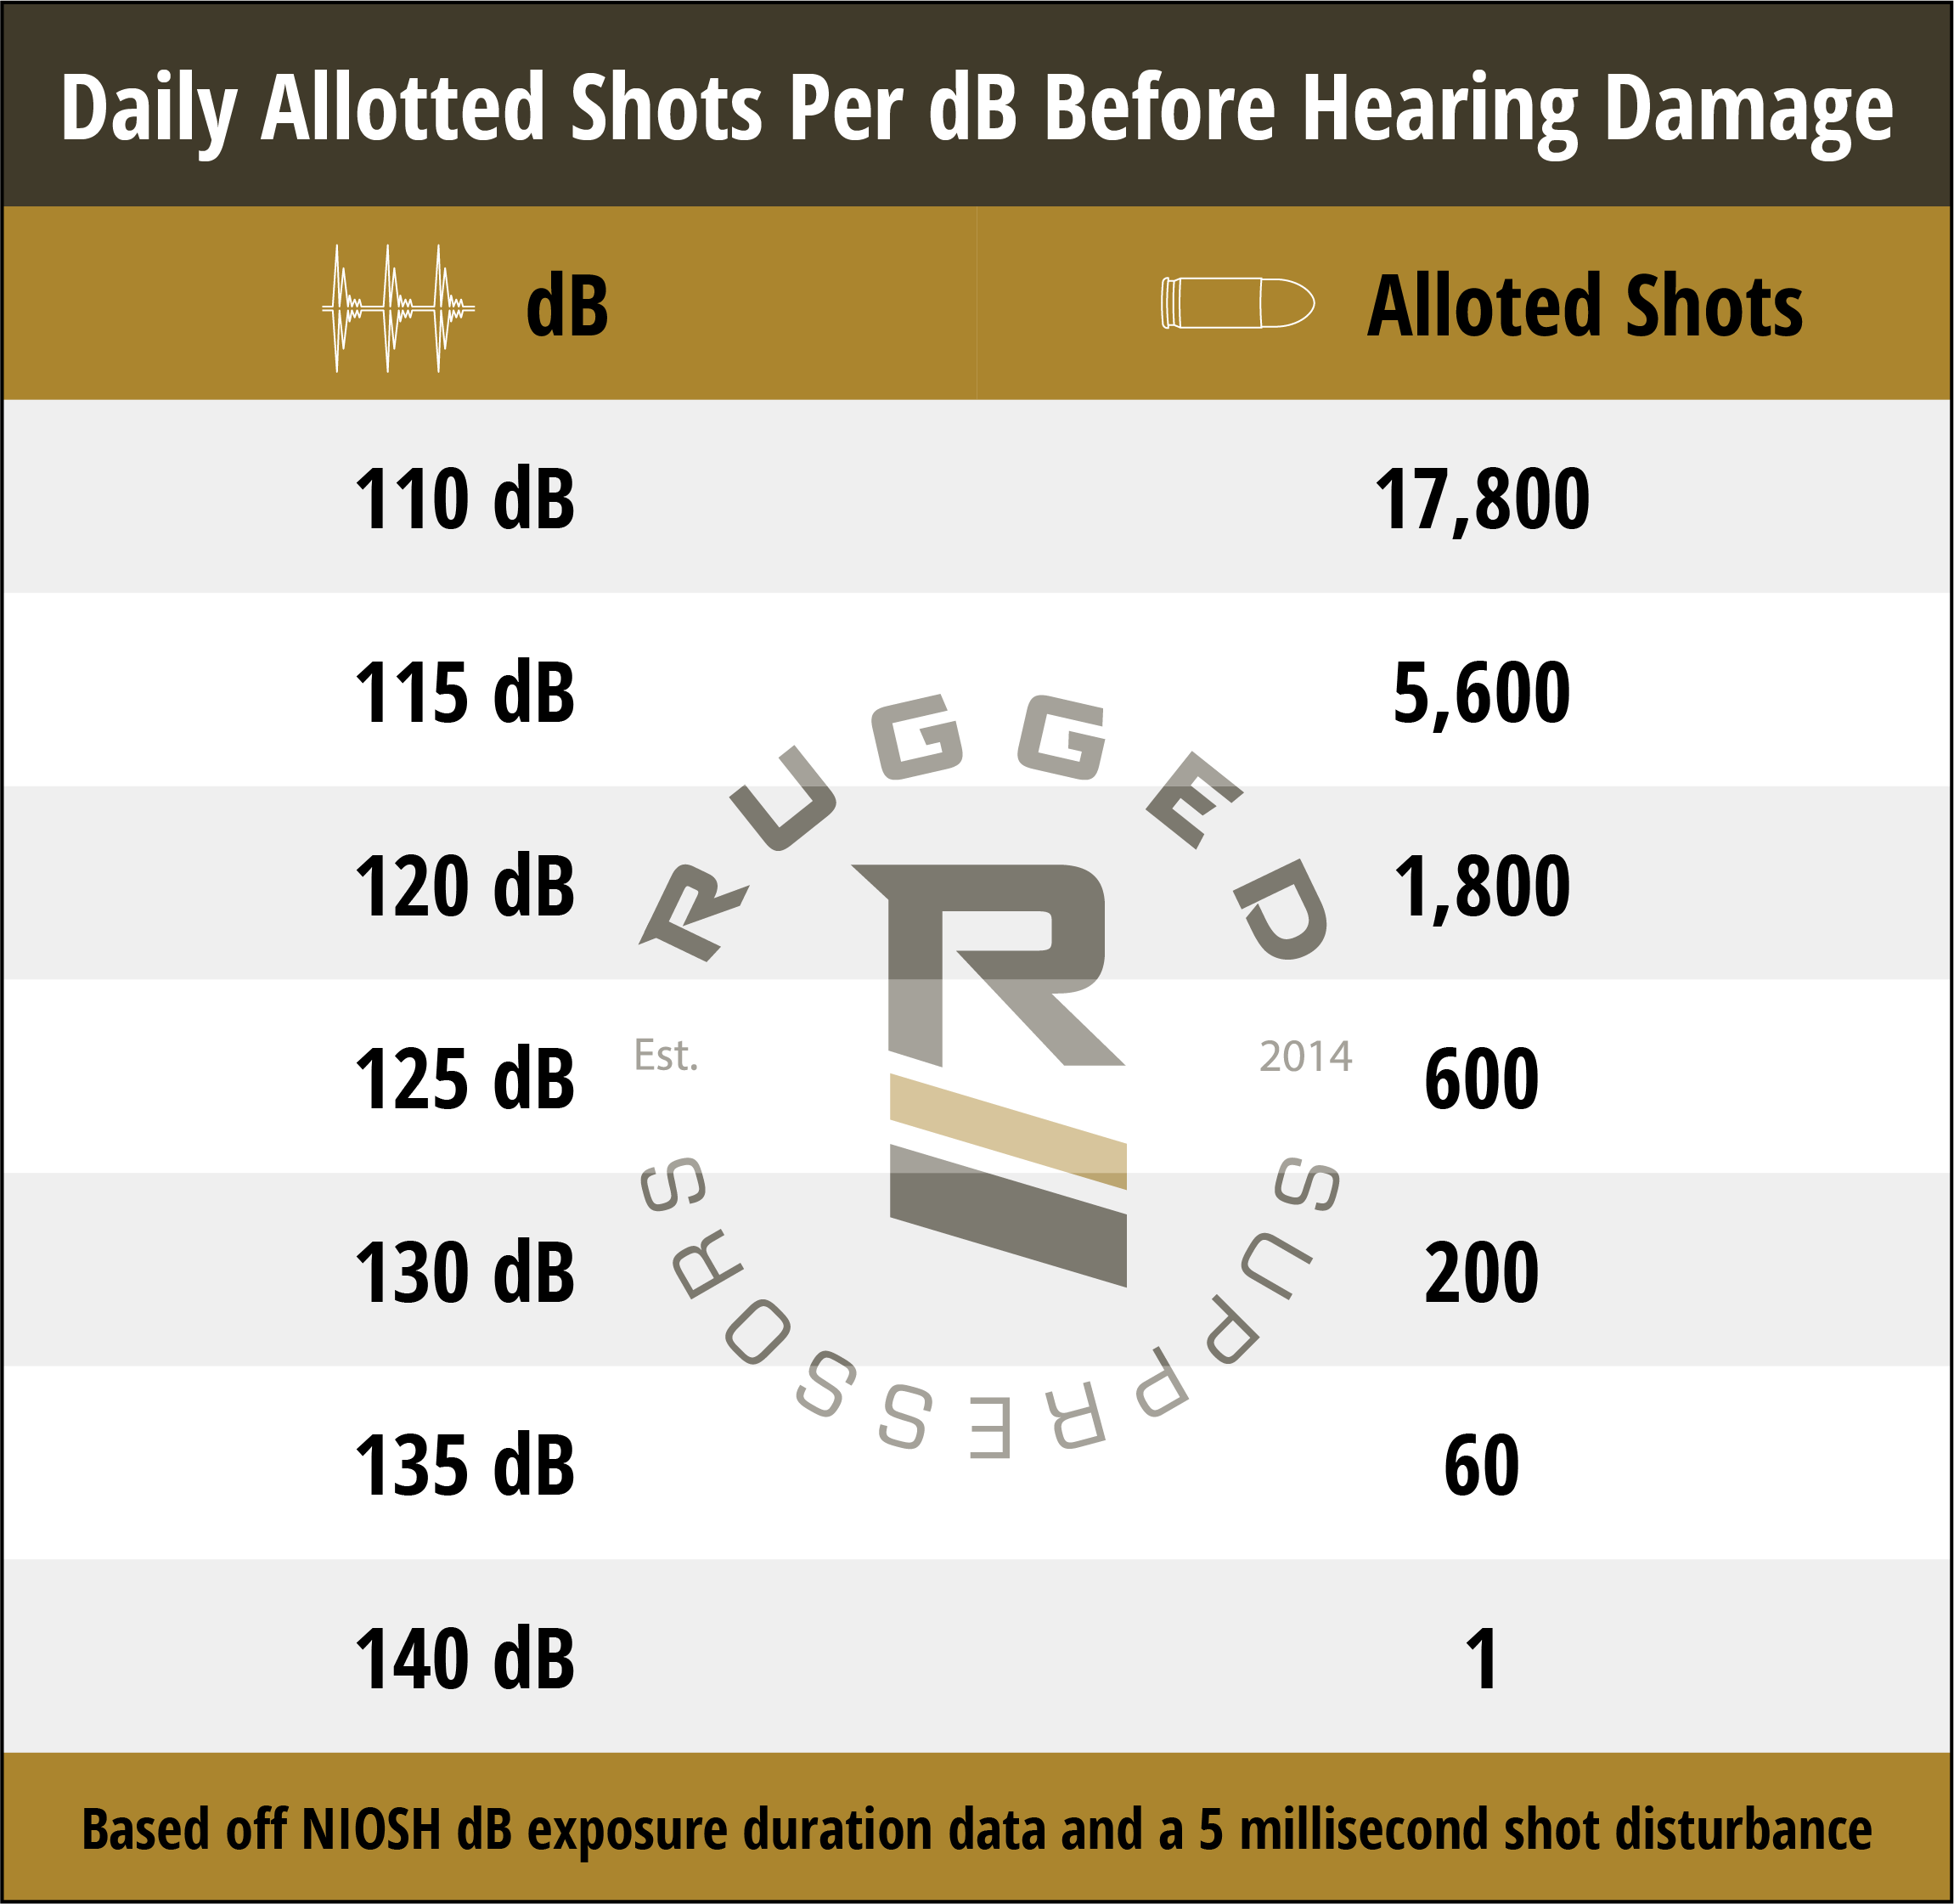 Daily Allotted Shots Per dB Before Hearing Damage